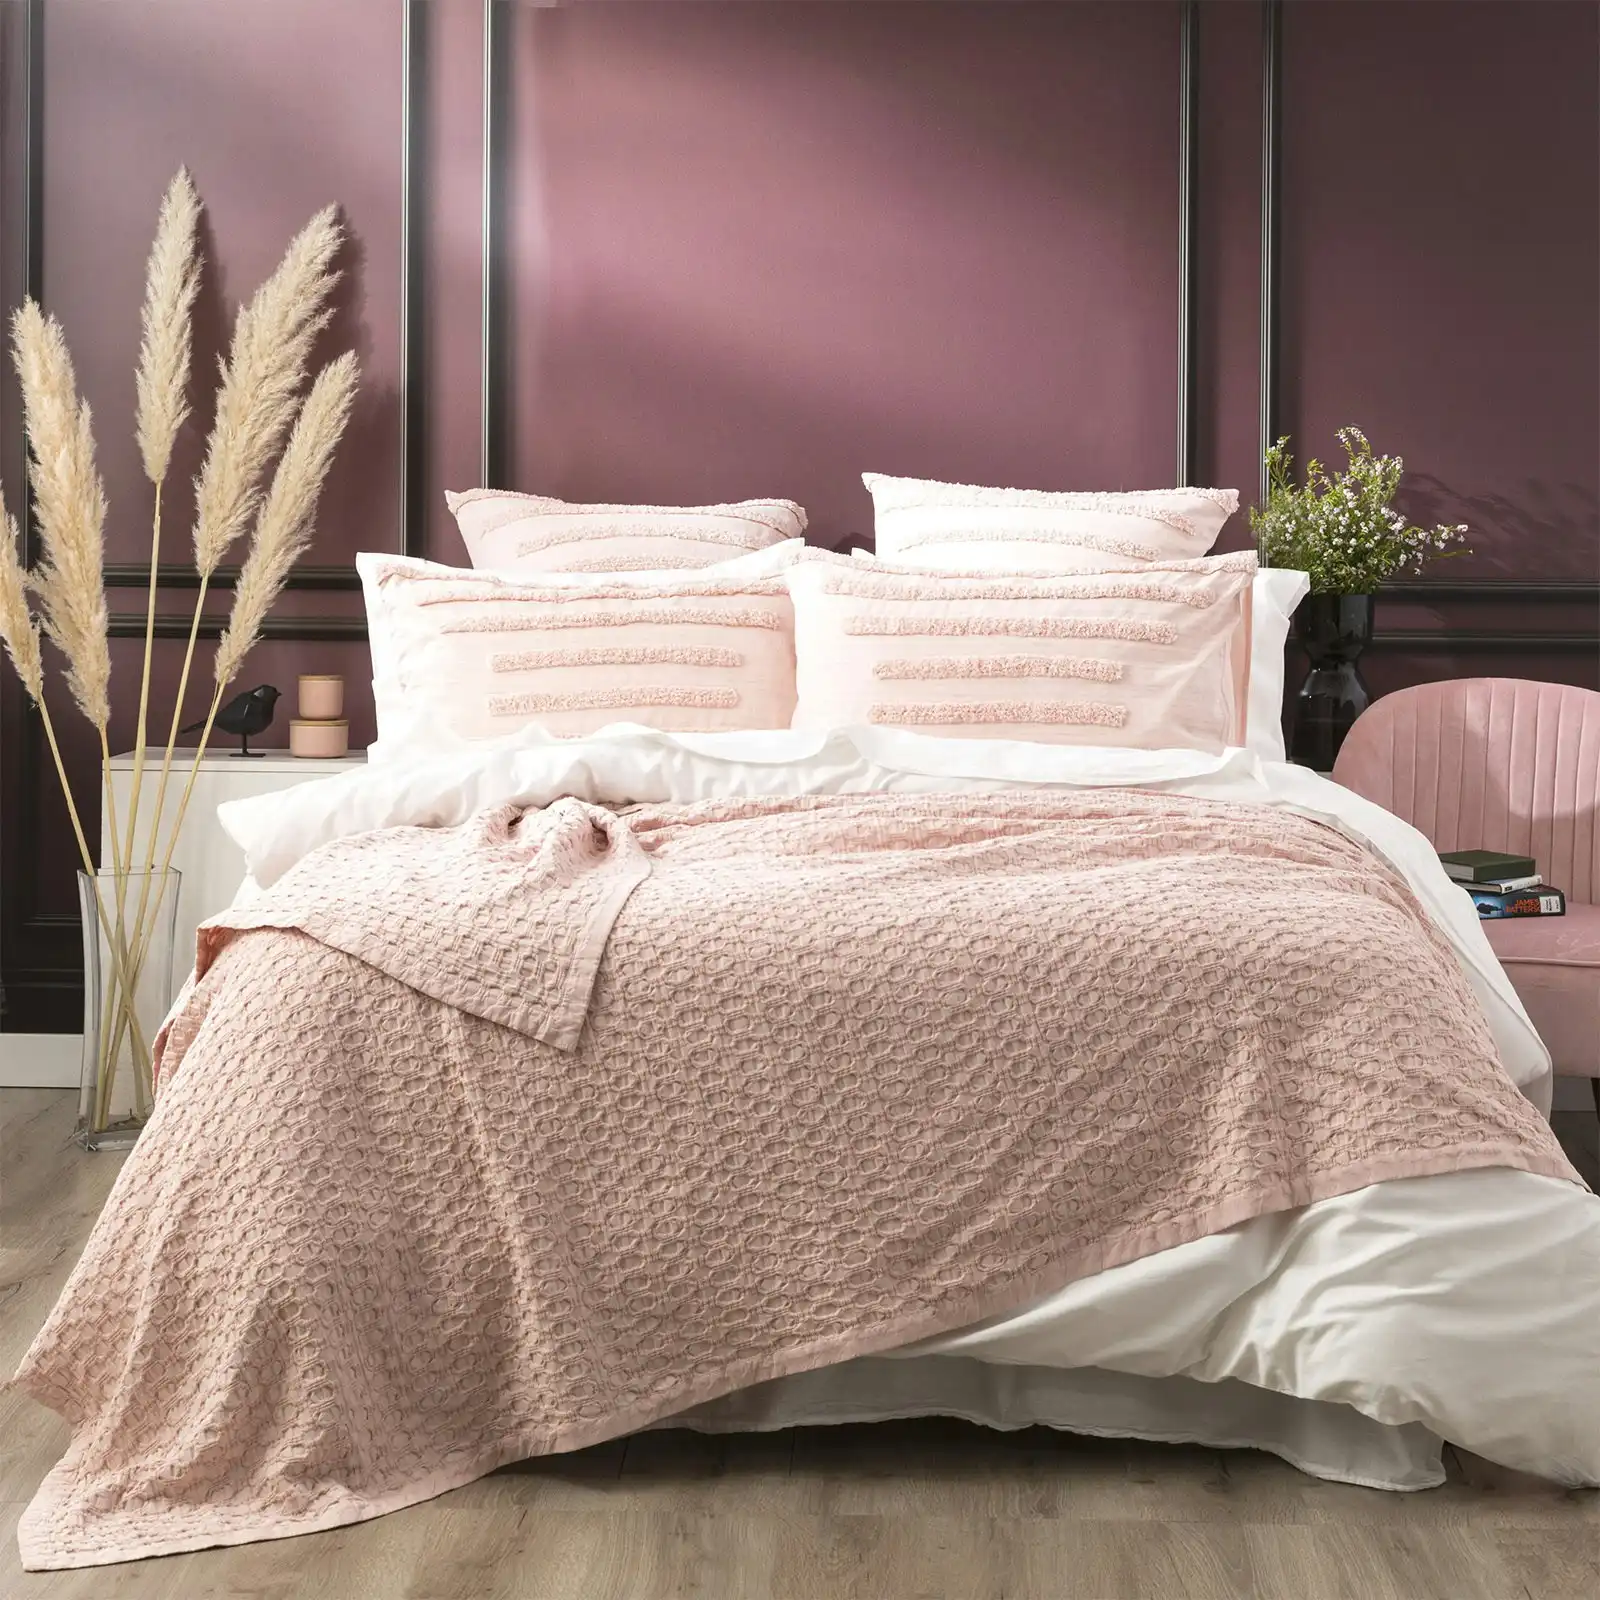 Renee Taylor Lexico Super King Waffle Blanket 480GSM Cotton Home Bedding Rose